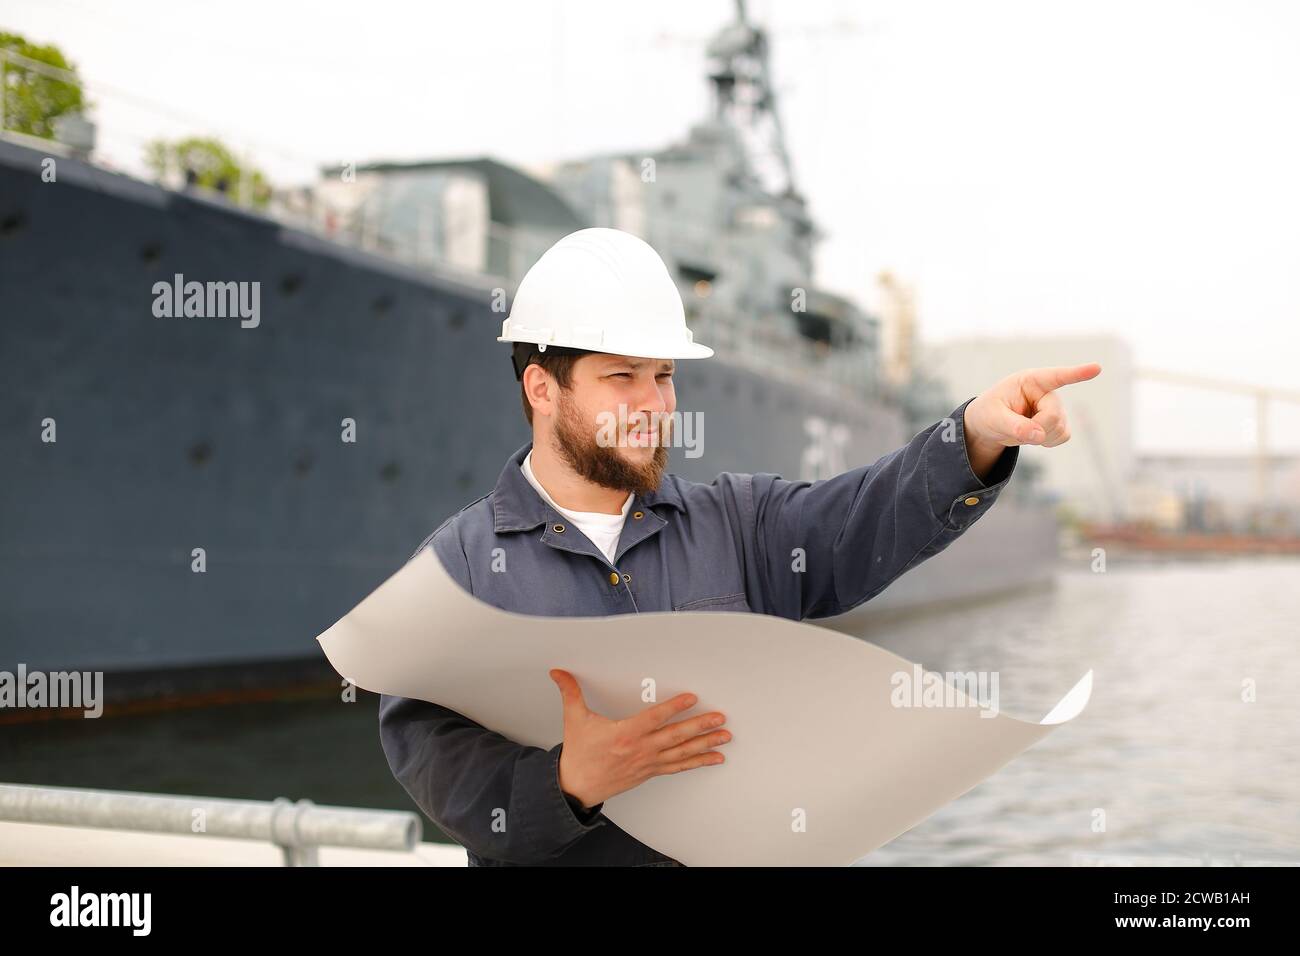 Maritime captain reading blueprints, showing by forefinger and standing near vessel. Stock Photo